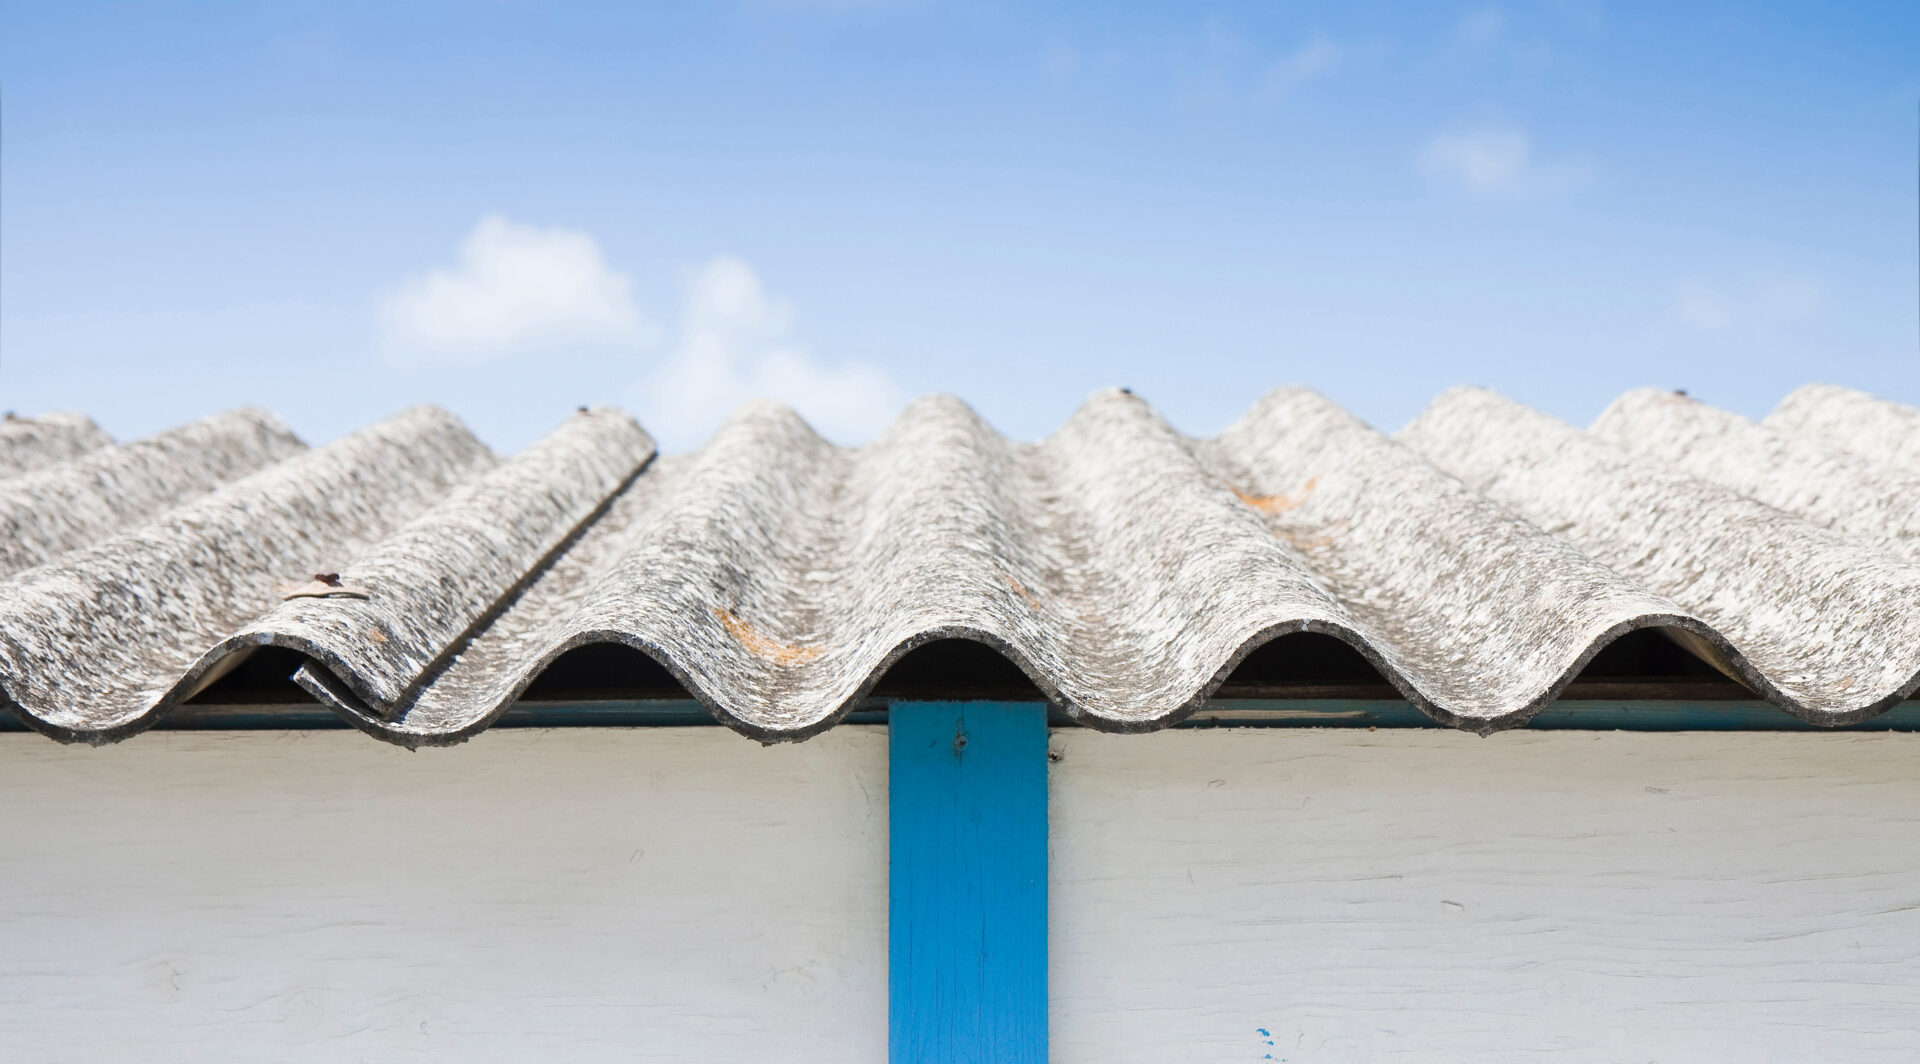 Asbestos or not? How to tell the difference